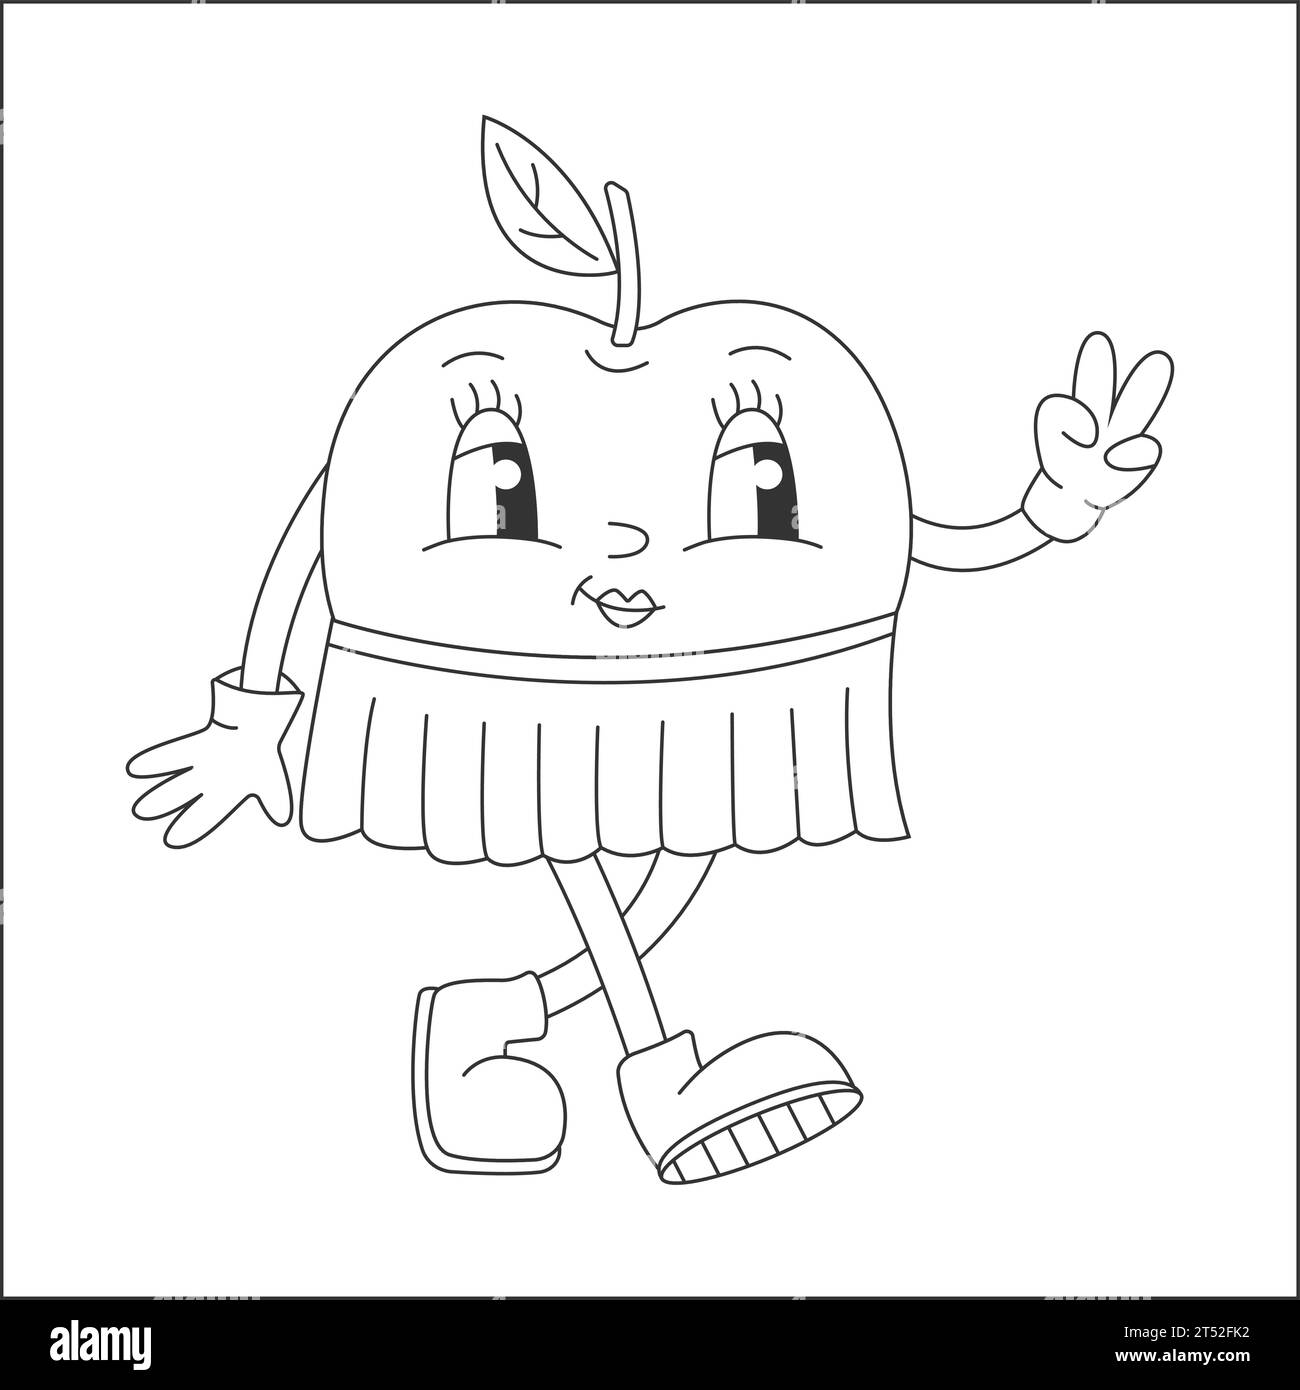 Coloring page with Fruit Retro Groovy Cartoon Hippie Character. Comic Black and White Apple Character on white background. Groovy Summer Vector Stock Vector